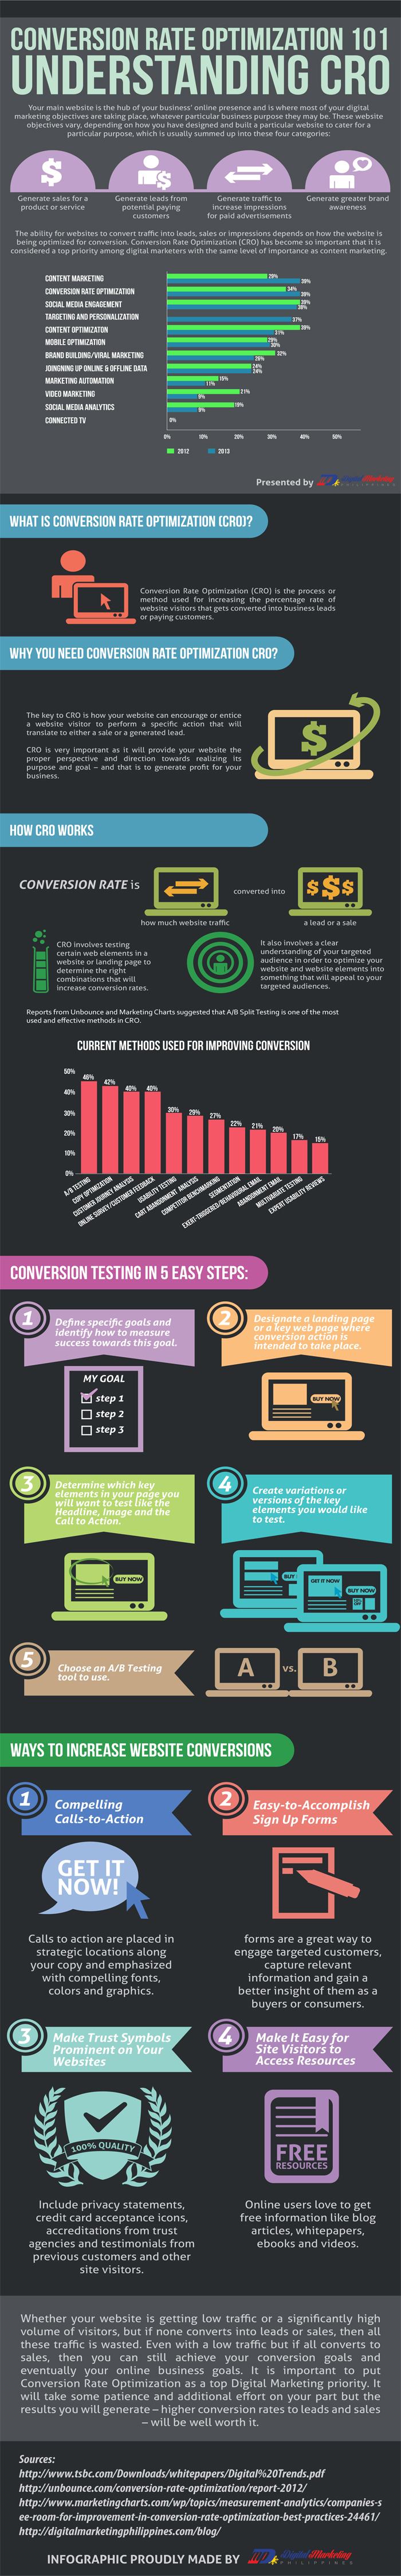 Conversion-Rate-Optimization-infographic